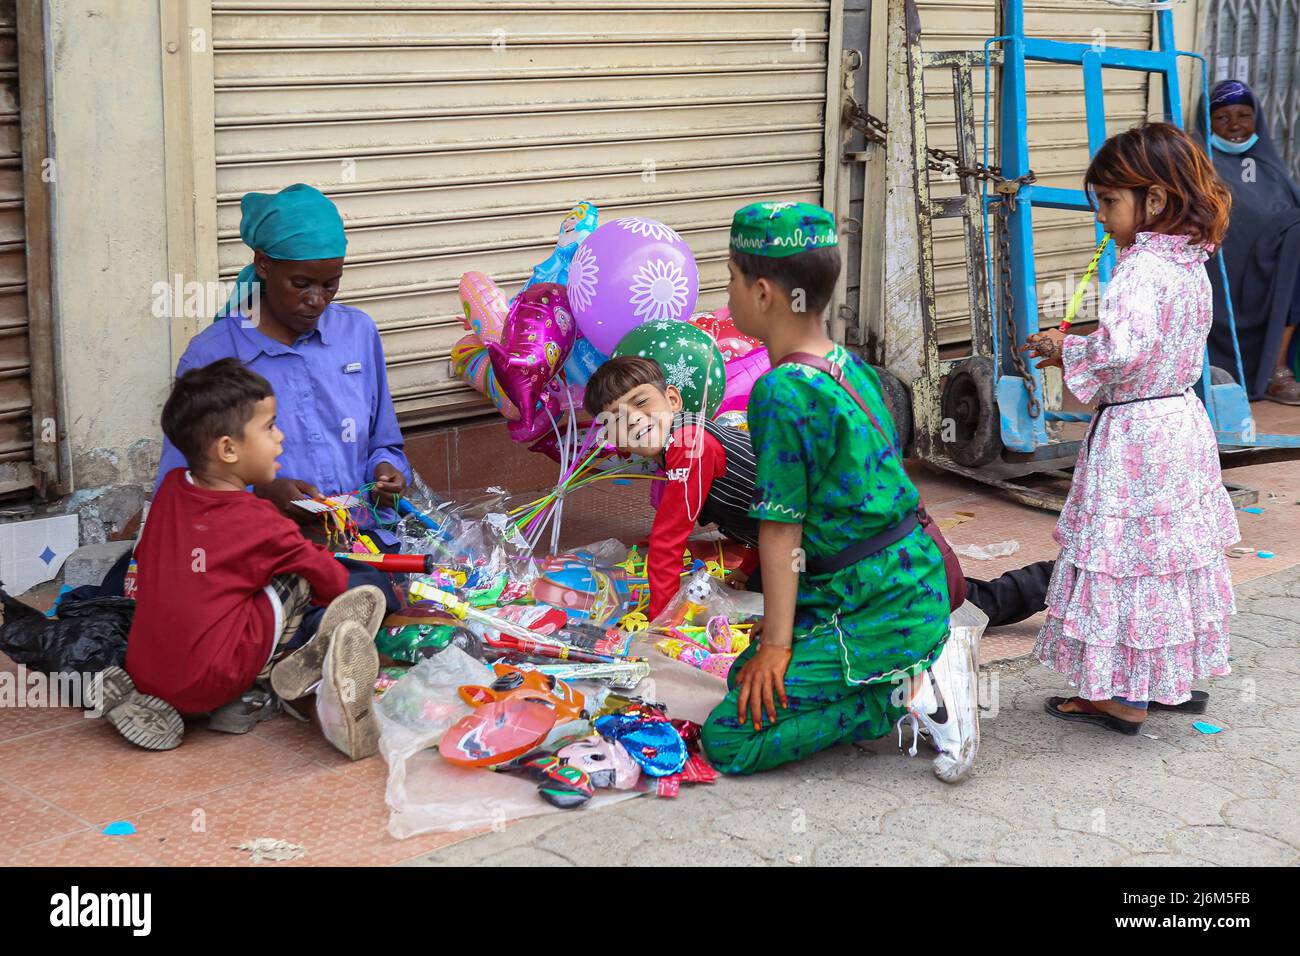 Kenyan Somali children around a street vendor along Jam street in Eastleigh, during Eid-Ul-Fitr celebrations. Muslims in Kenya celebrate Eid-Ul-Fitr which marks the end of the Holy month of Ramadhan. Stock Photo